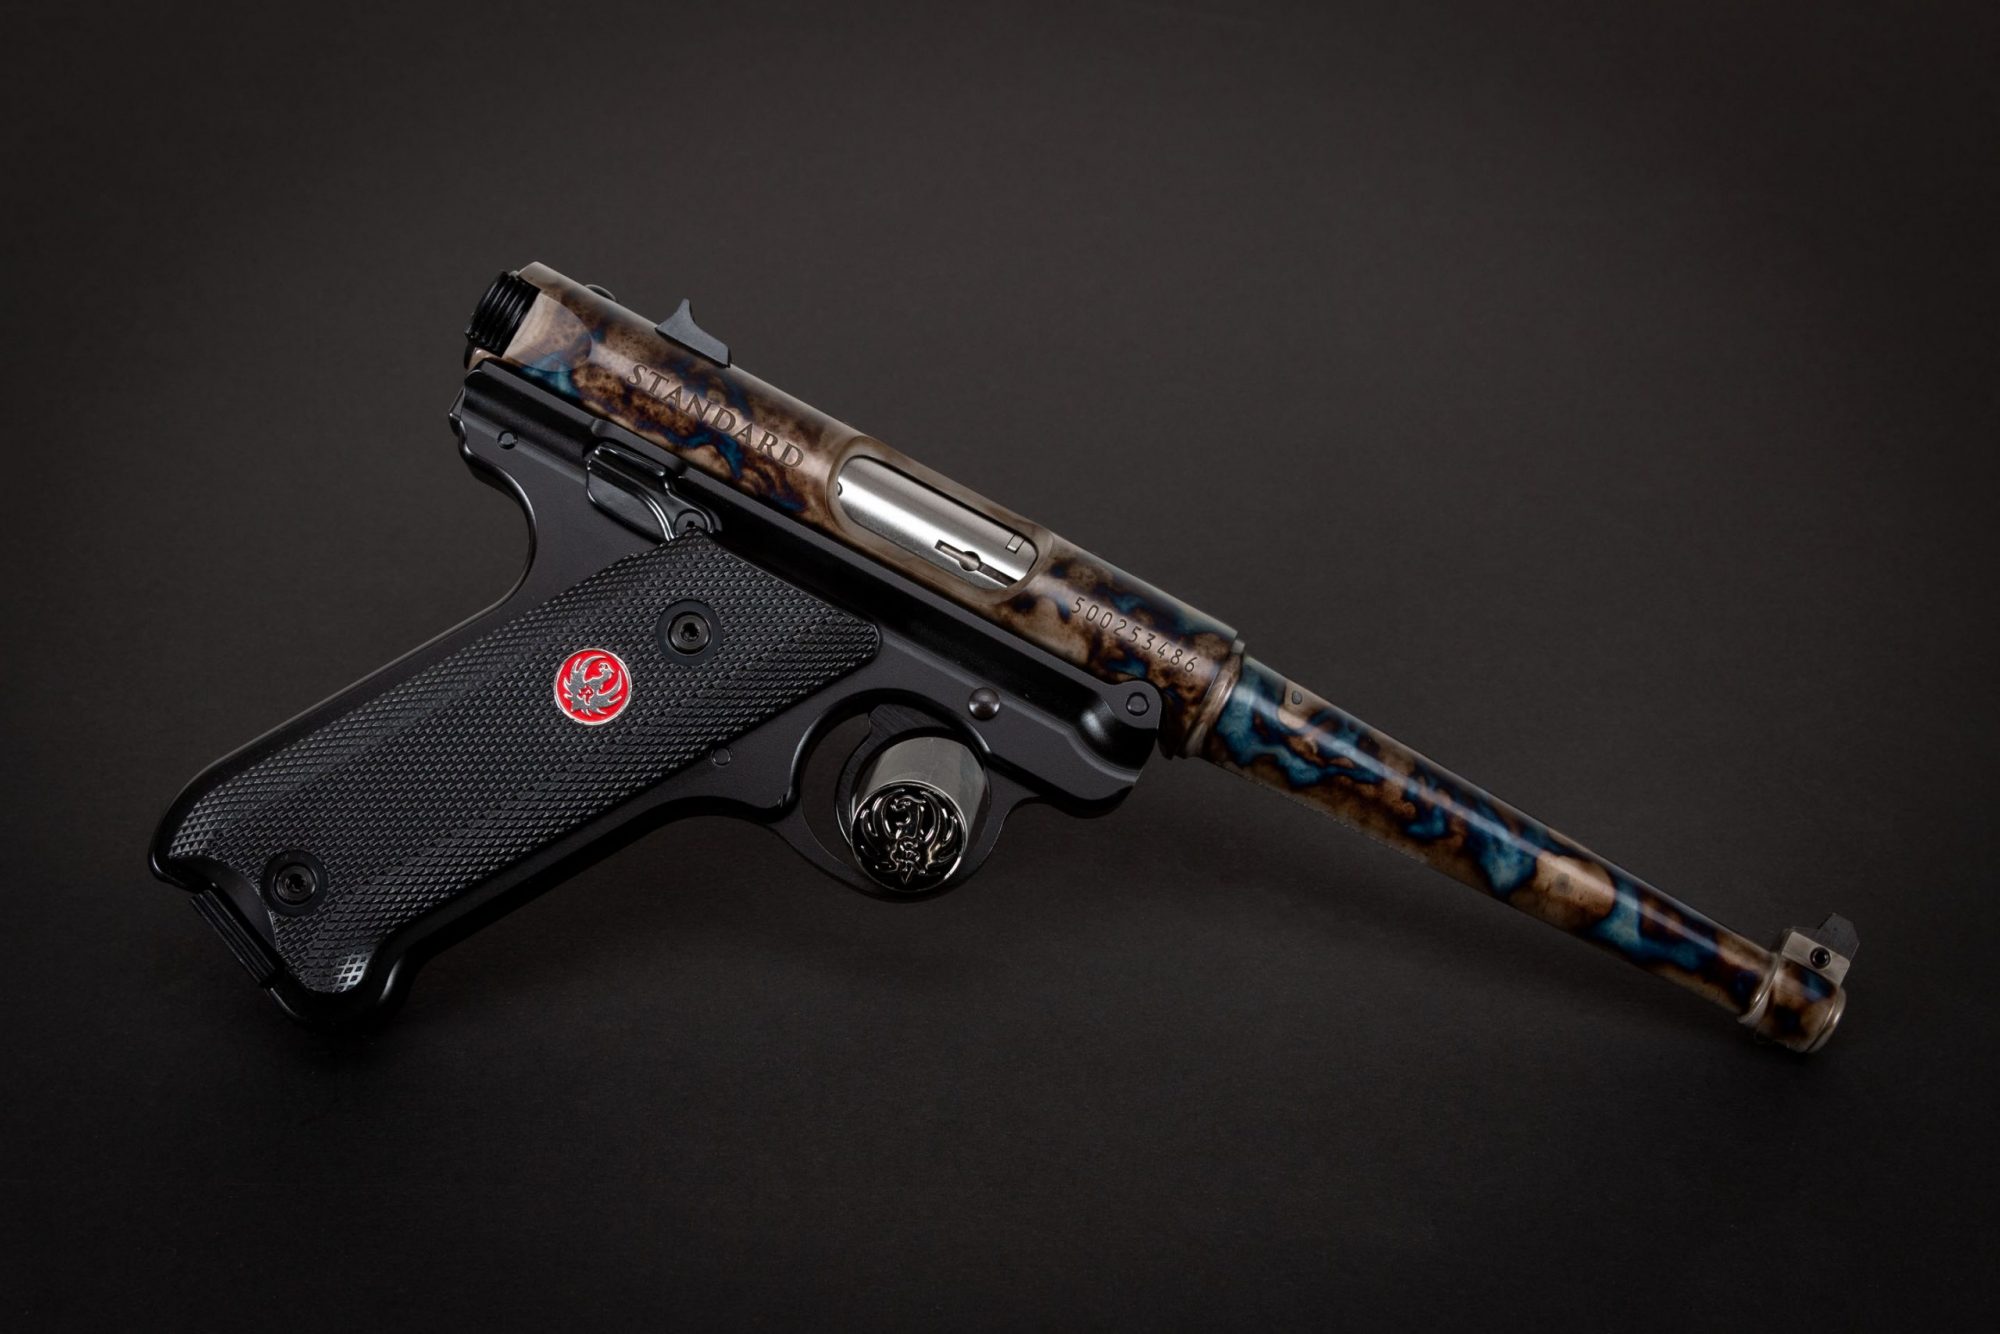 Photo of a color case hardened Ruger Mark IV Standard pistol, featuring bone charcoal color case hardening by Turnbull Restoration of Bloomfield, NY